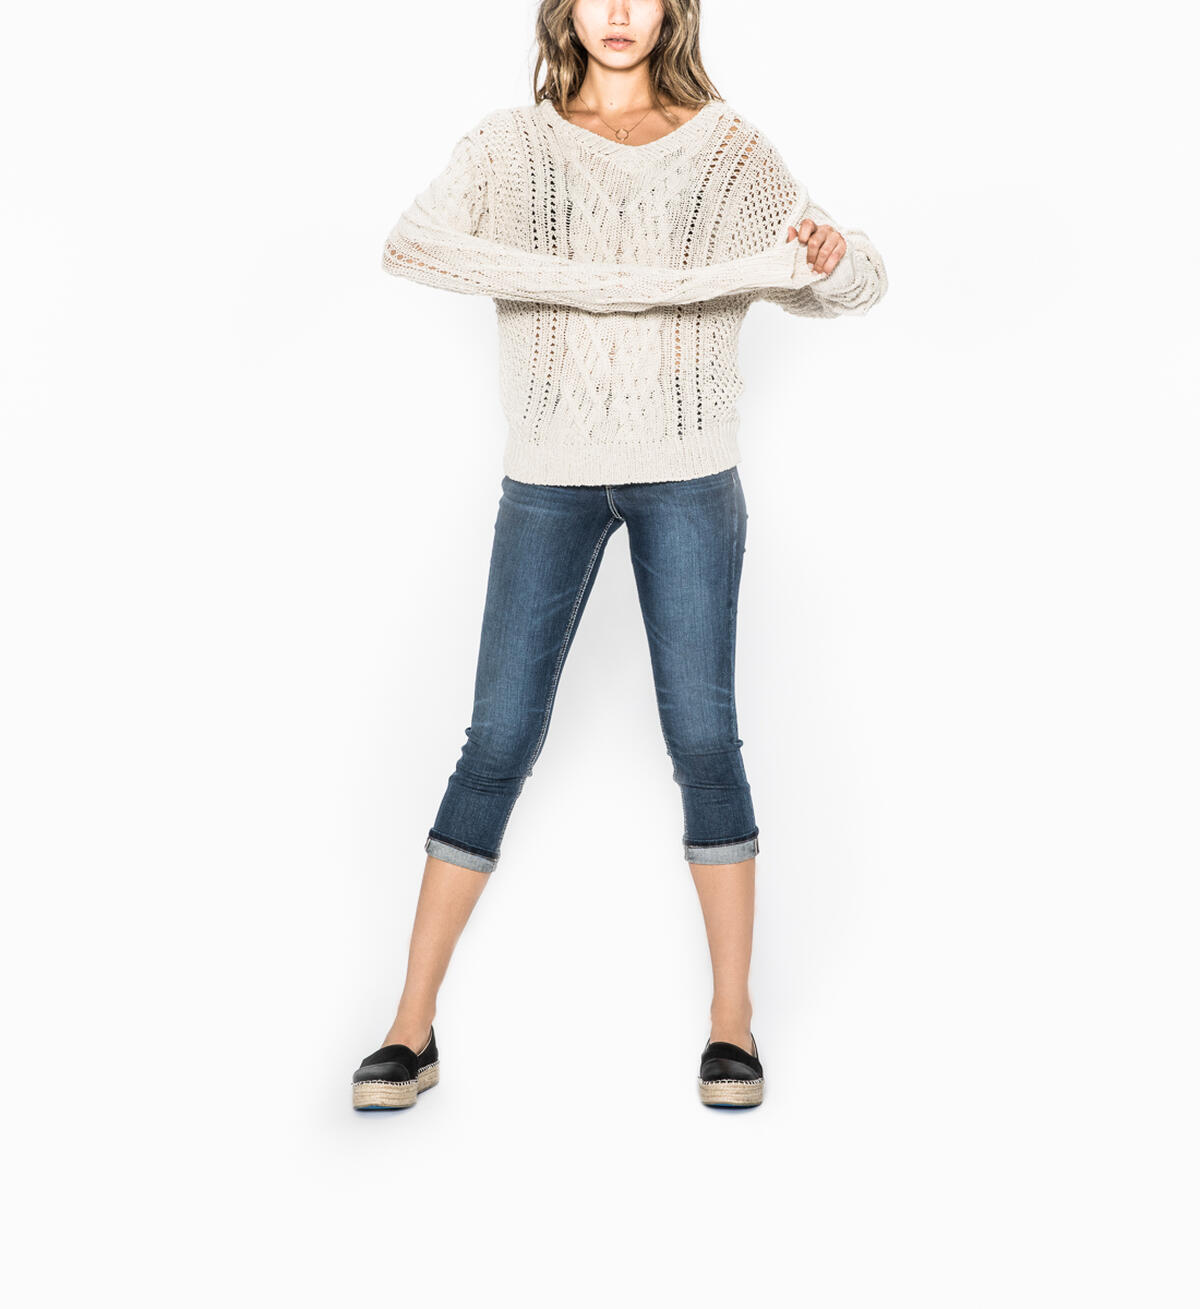 Skylar - Long-Sleeve Cable Knit Sweater, , hi-res image number 0